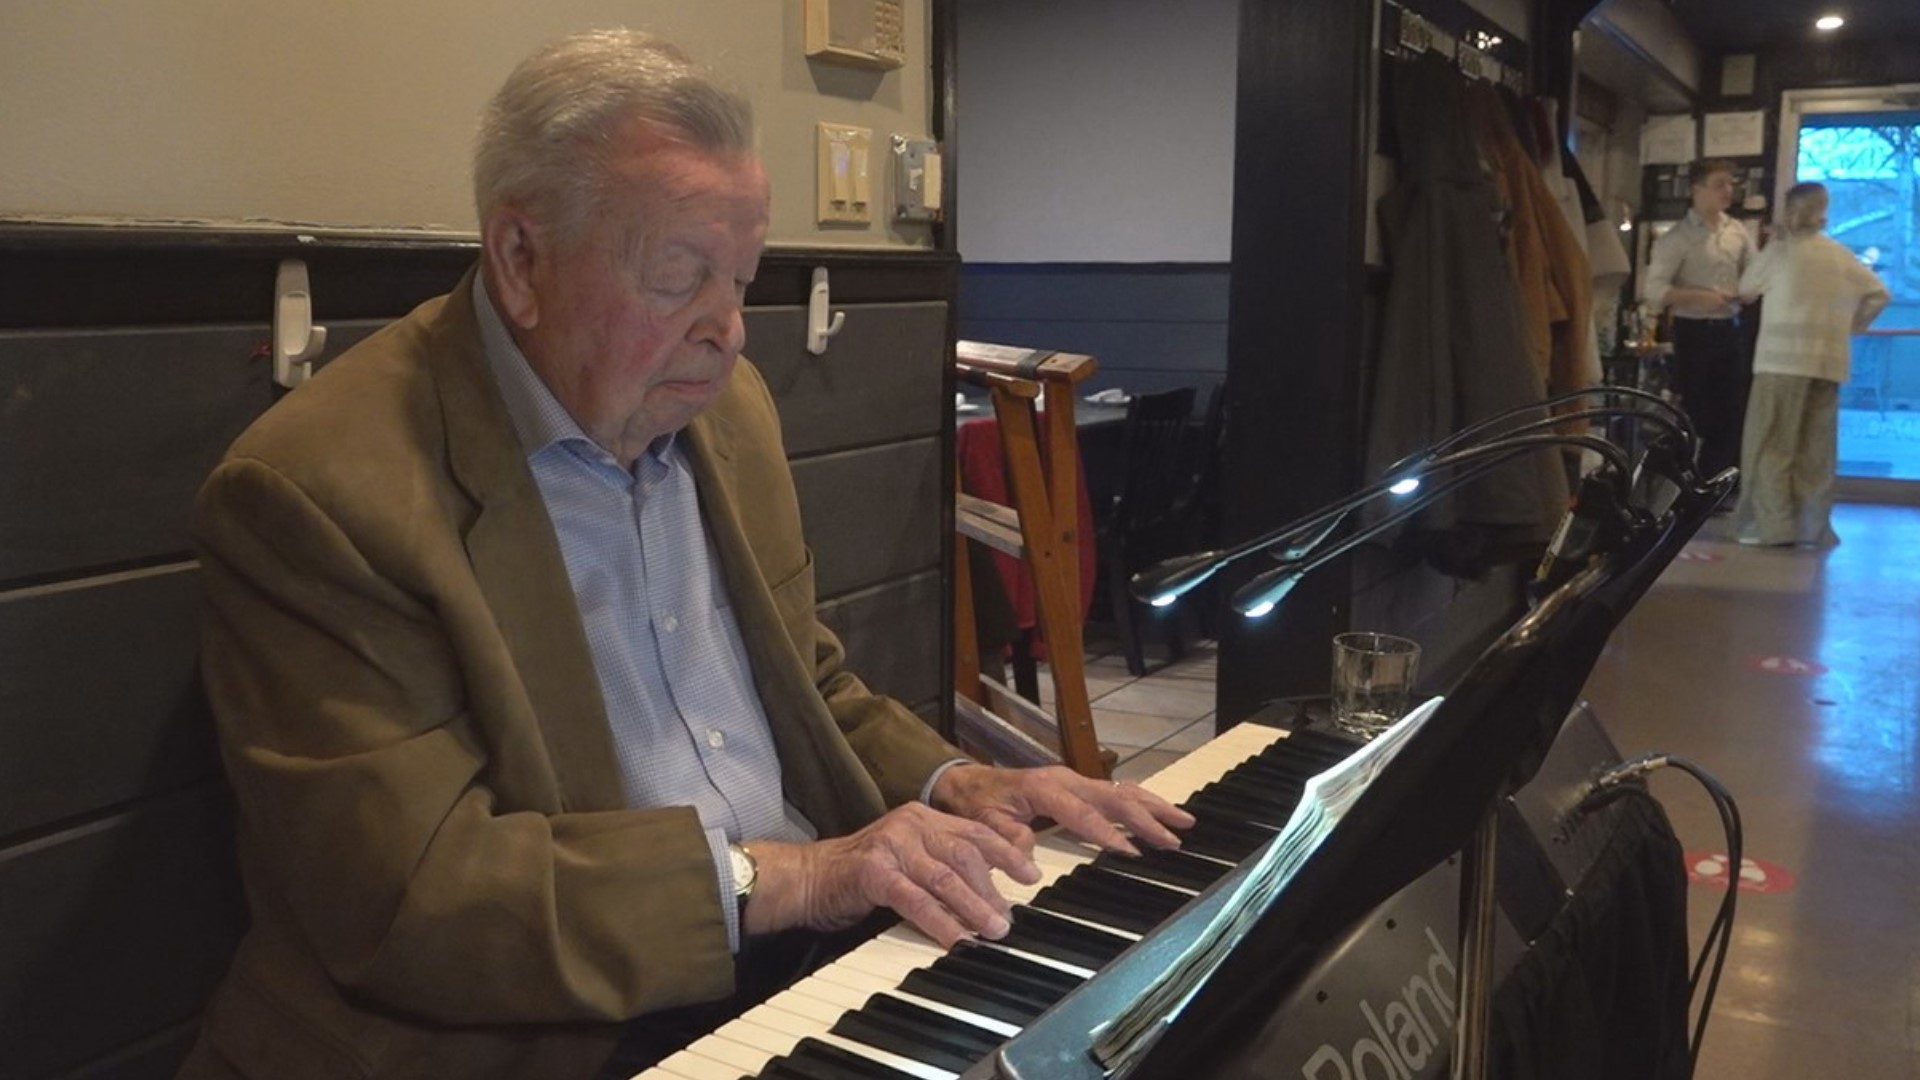 Herb Sell, 93, is a well-known name in Adams County. He's been playing piano since he was 7 years old and now, in his 90's, he's still soothing audiences.